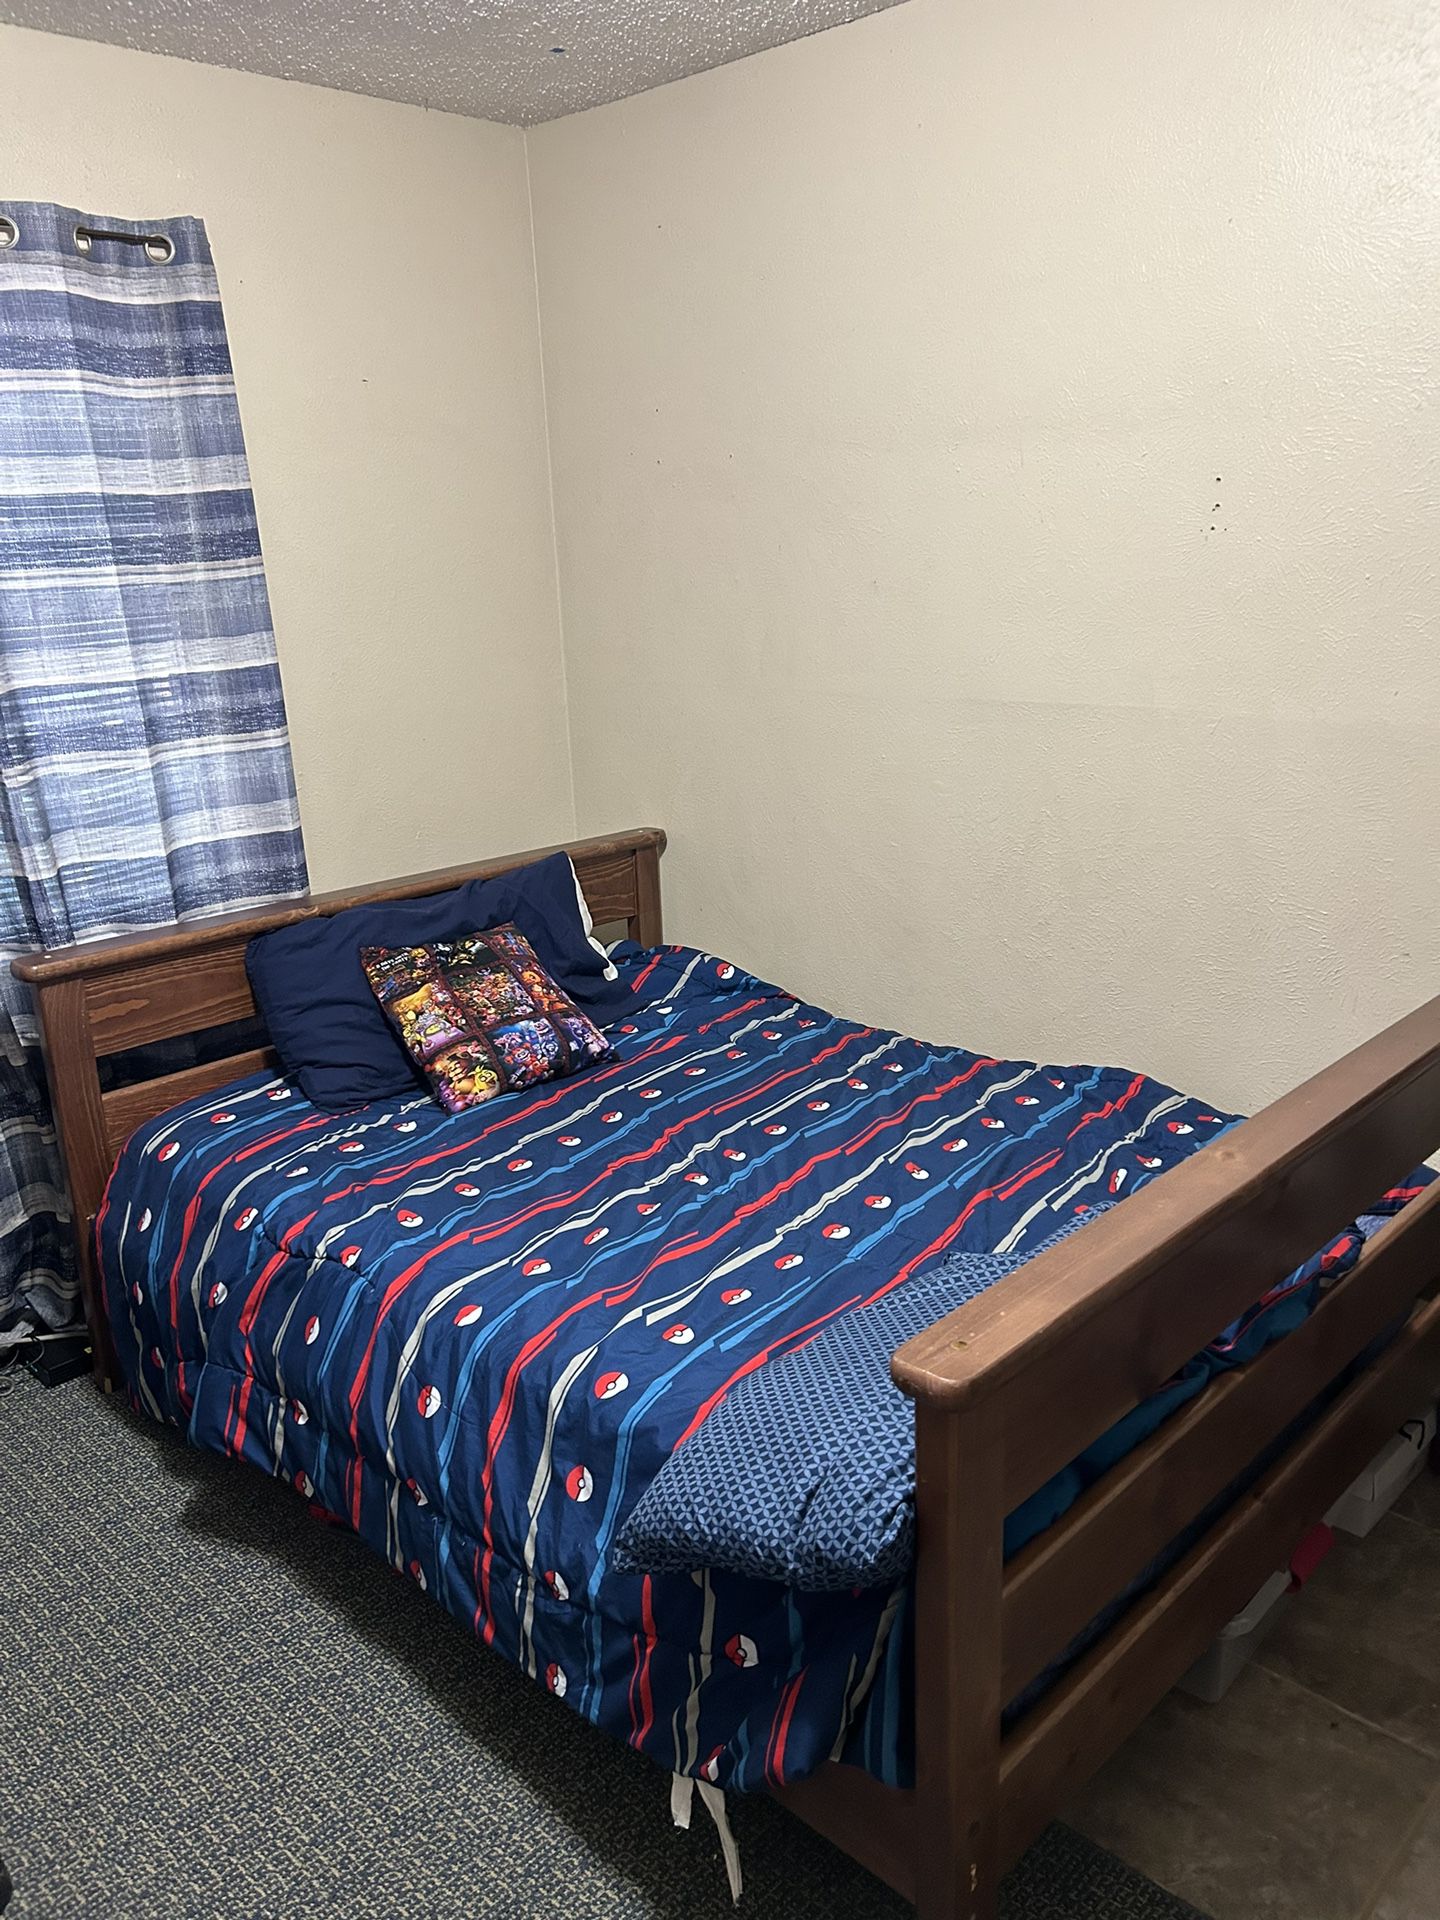 Free Wooden Bunk beds